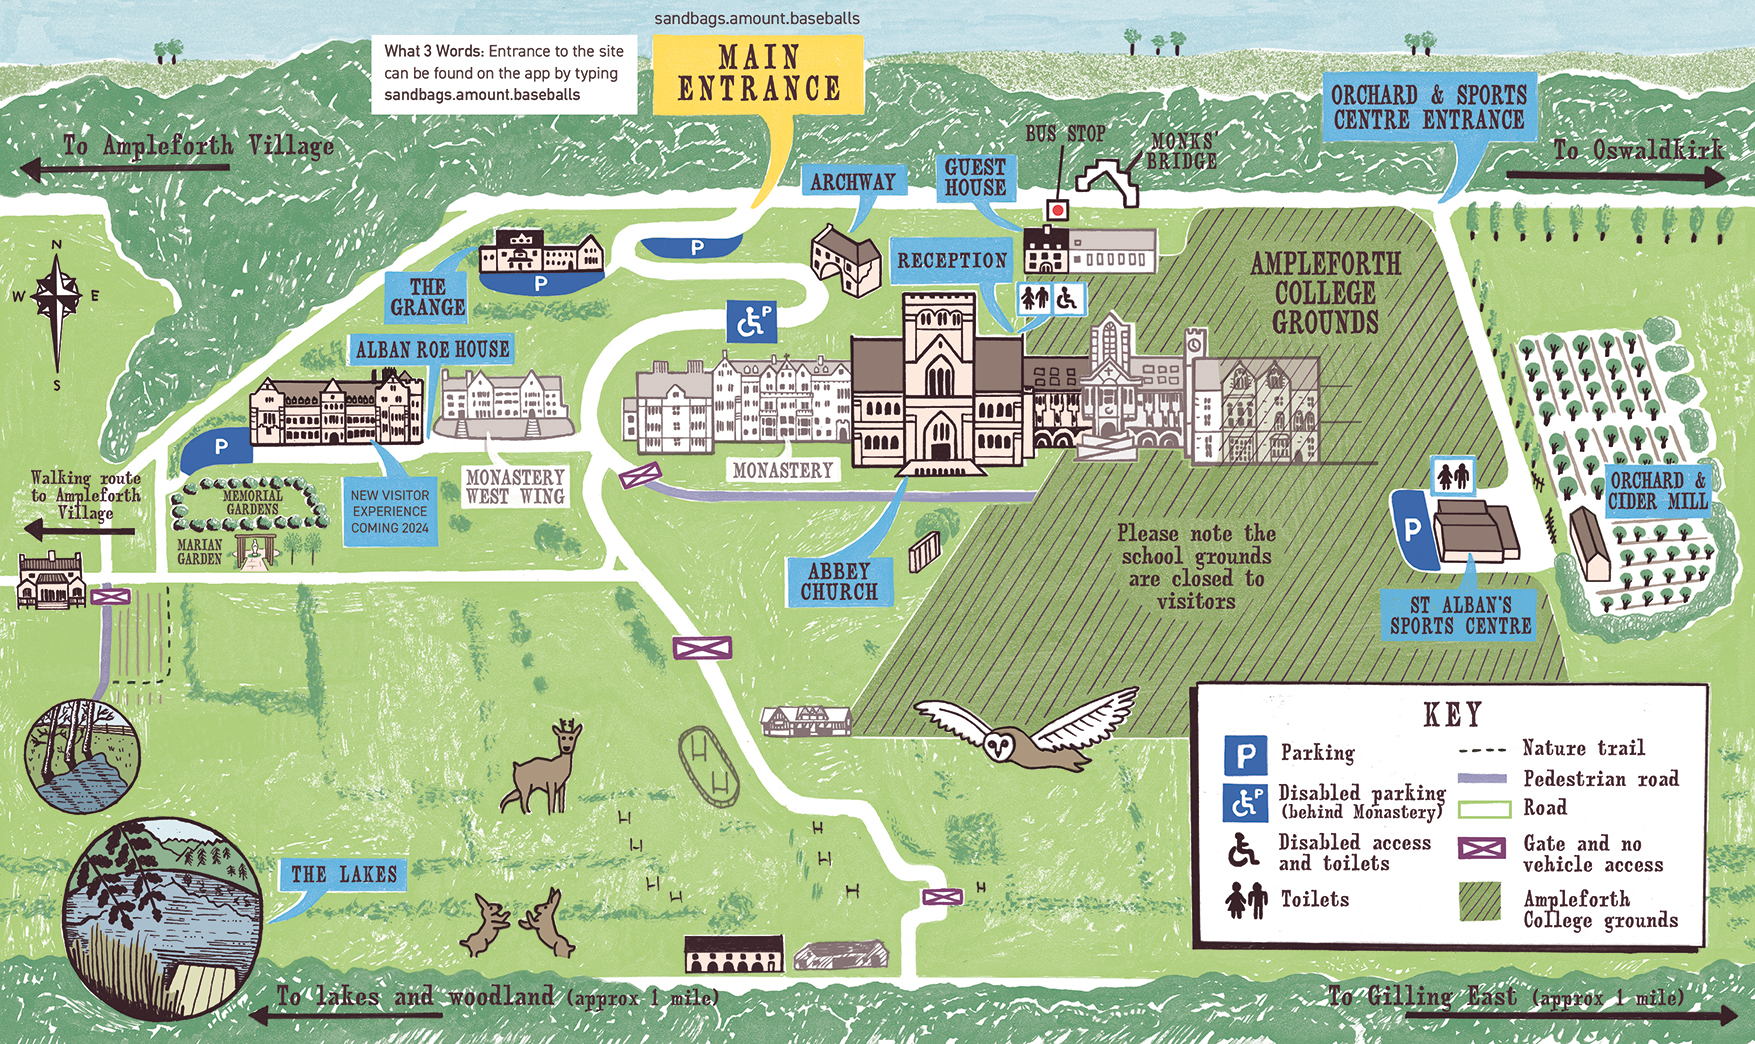 Map of Ampleforth Abbey